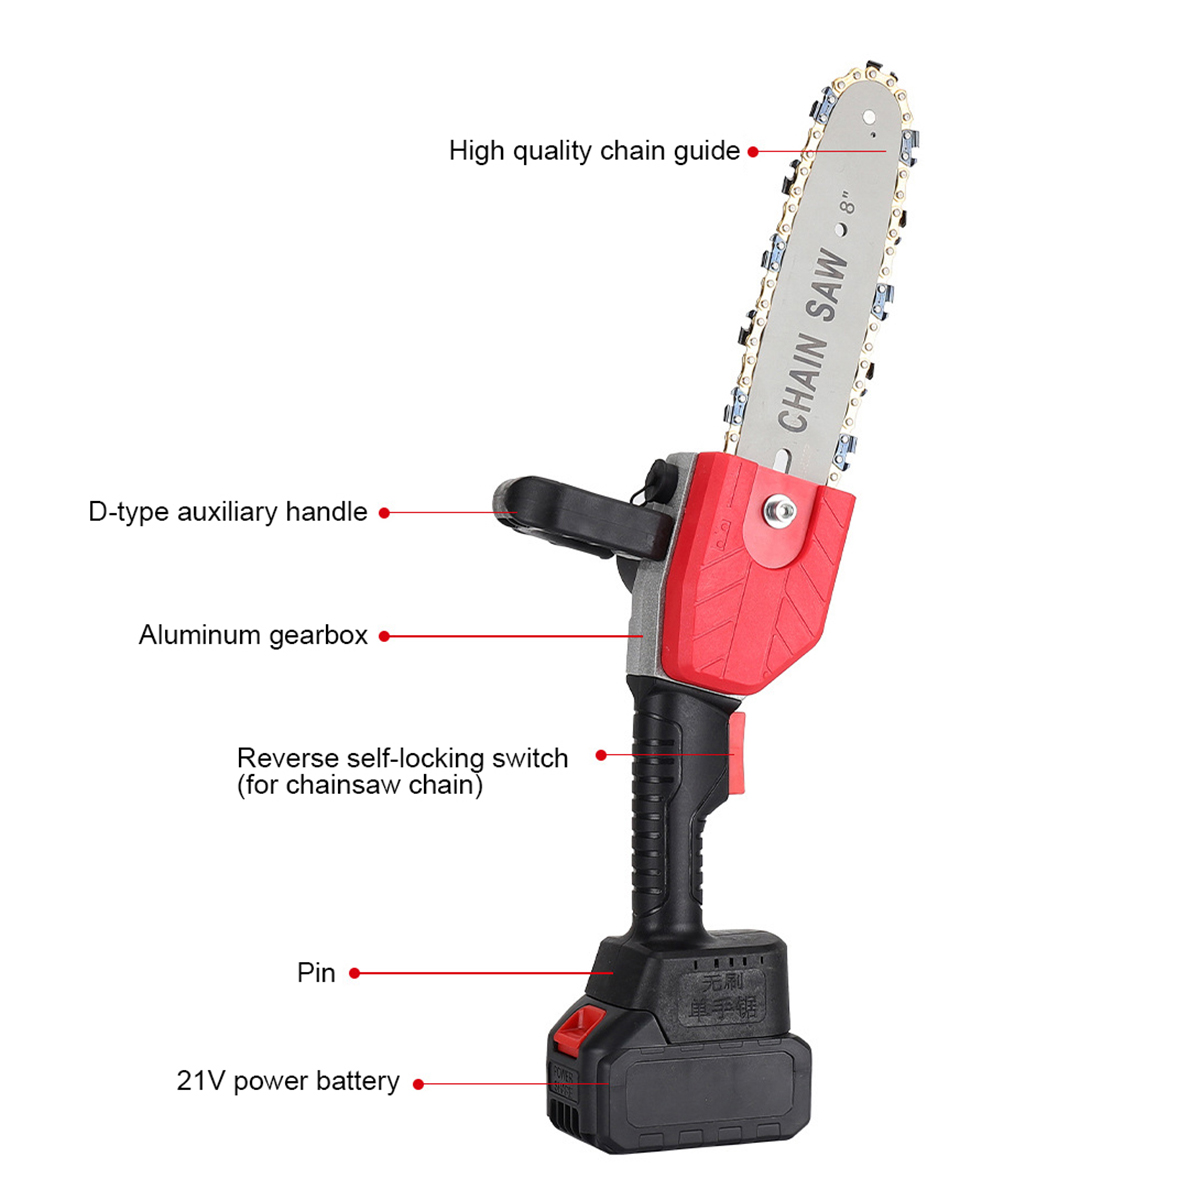 Mini-Chainsaw-8-Inch-21V-Portable-Brushless-Cordless-Electric-Chain-Saw-Handheld-Pruning-Shears-Chai-1795044-15